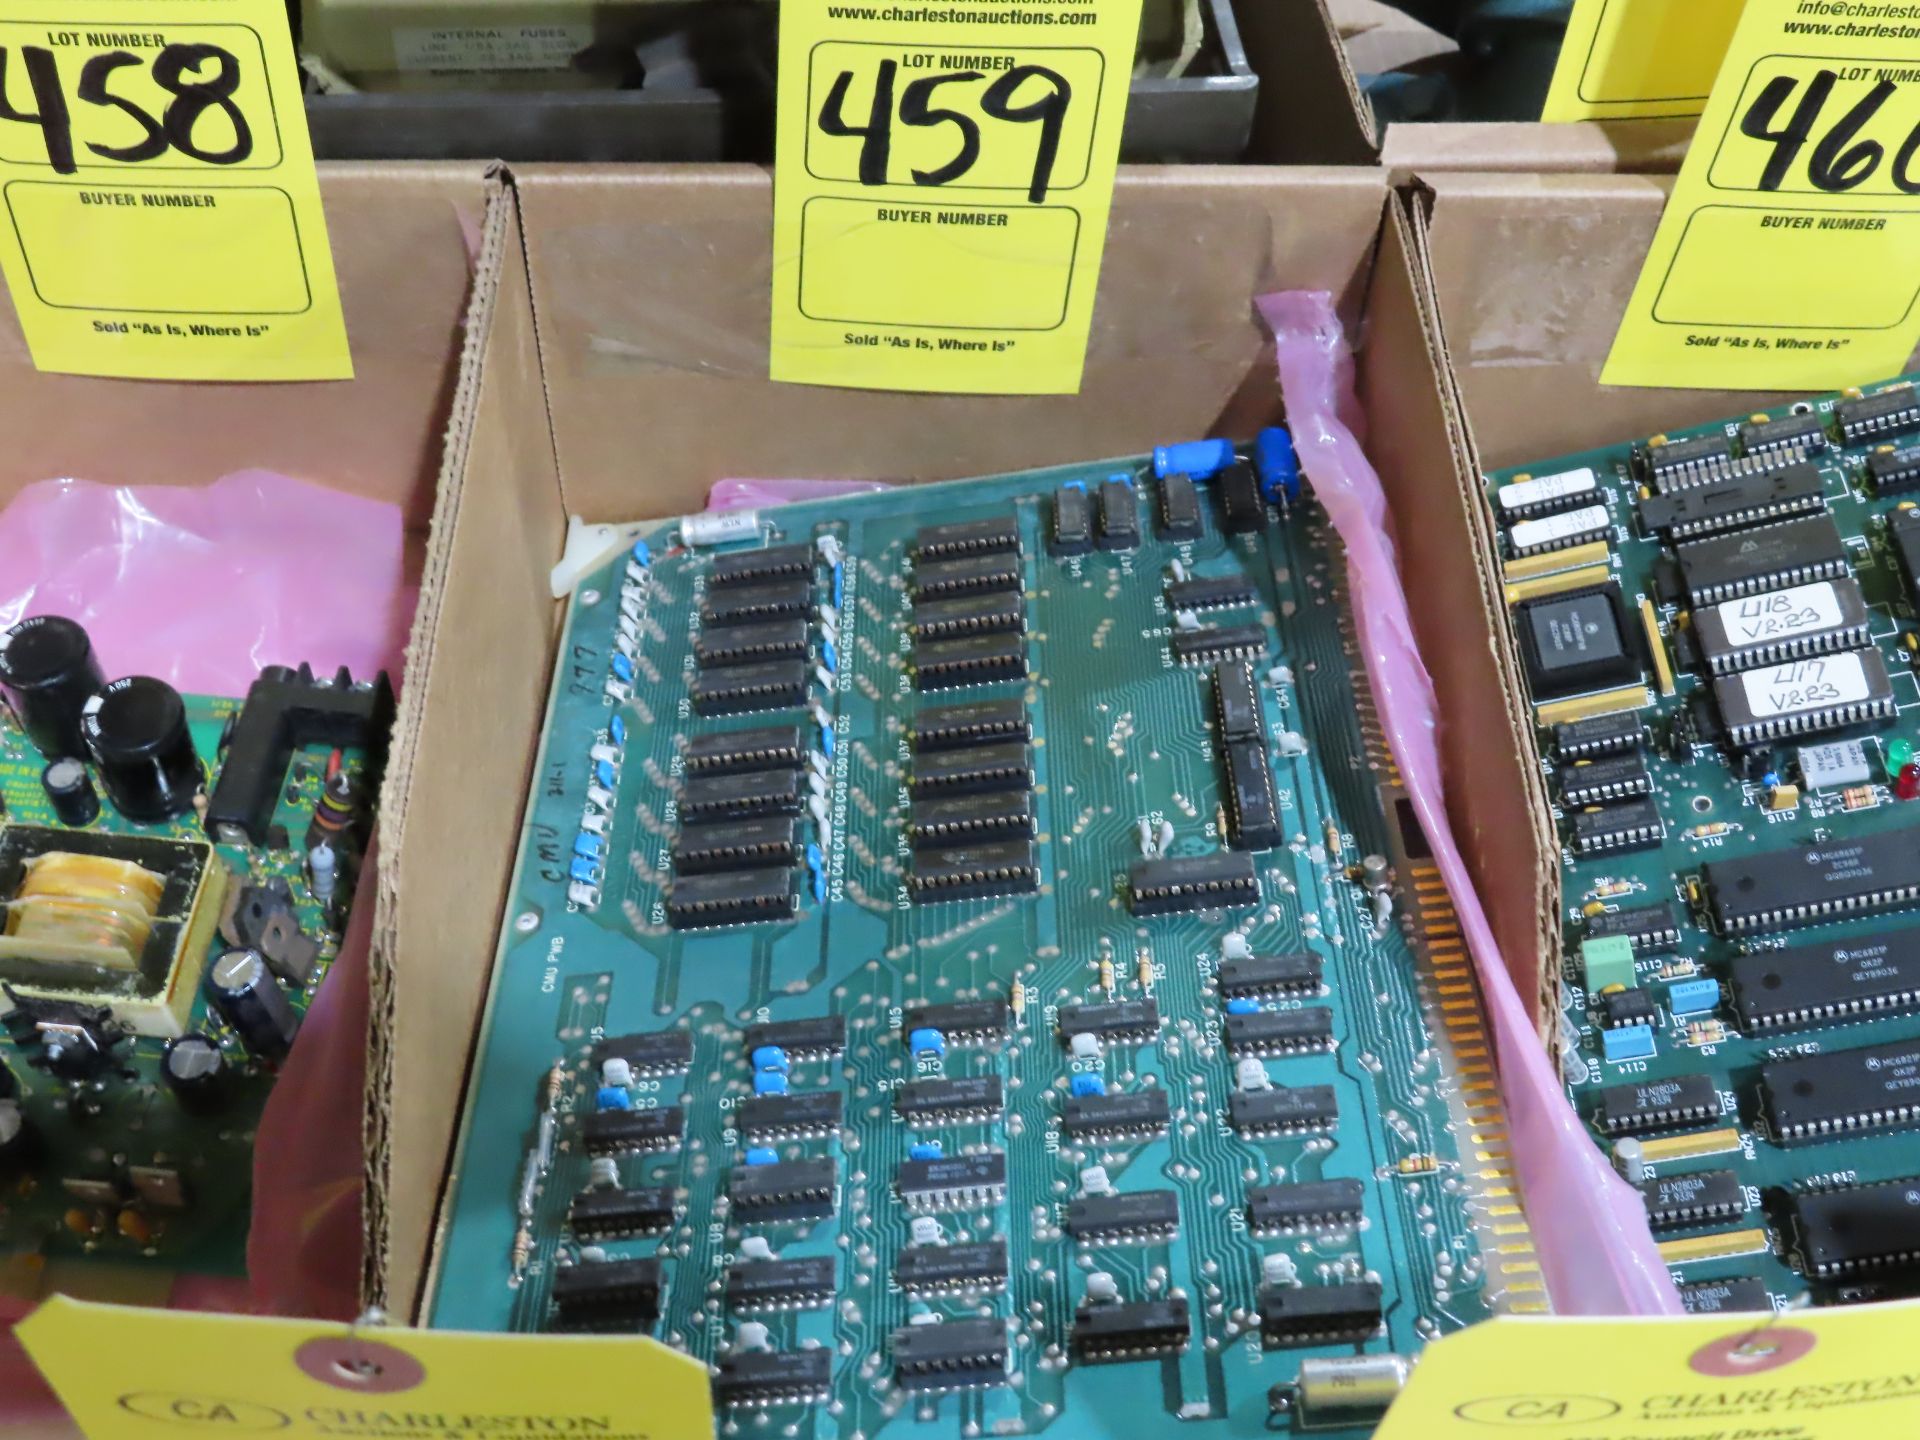 CMU PWB 4620401 circuit boad, as always, with Brolyn LLC auctions, all lots can be picked up from